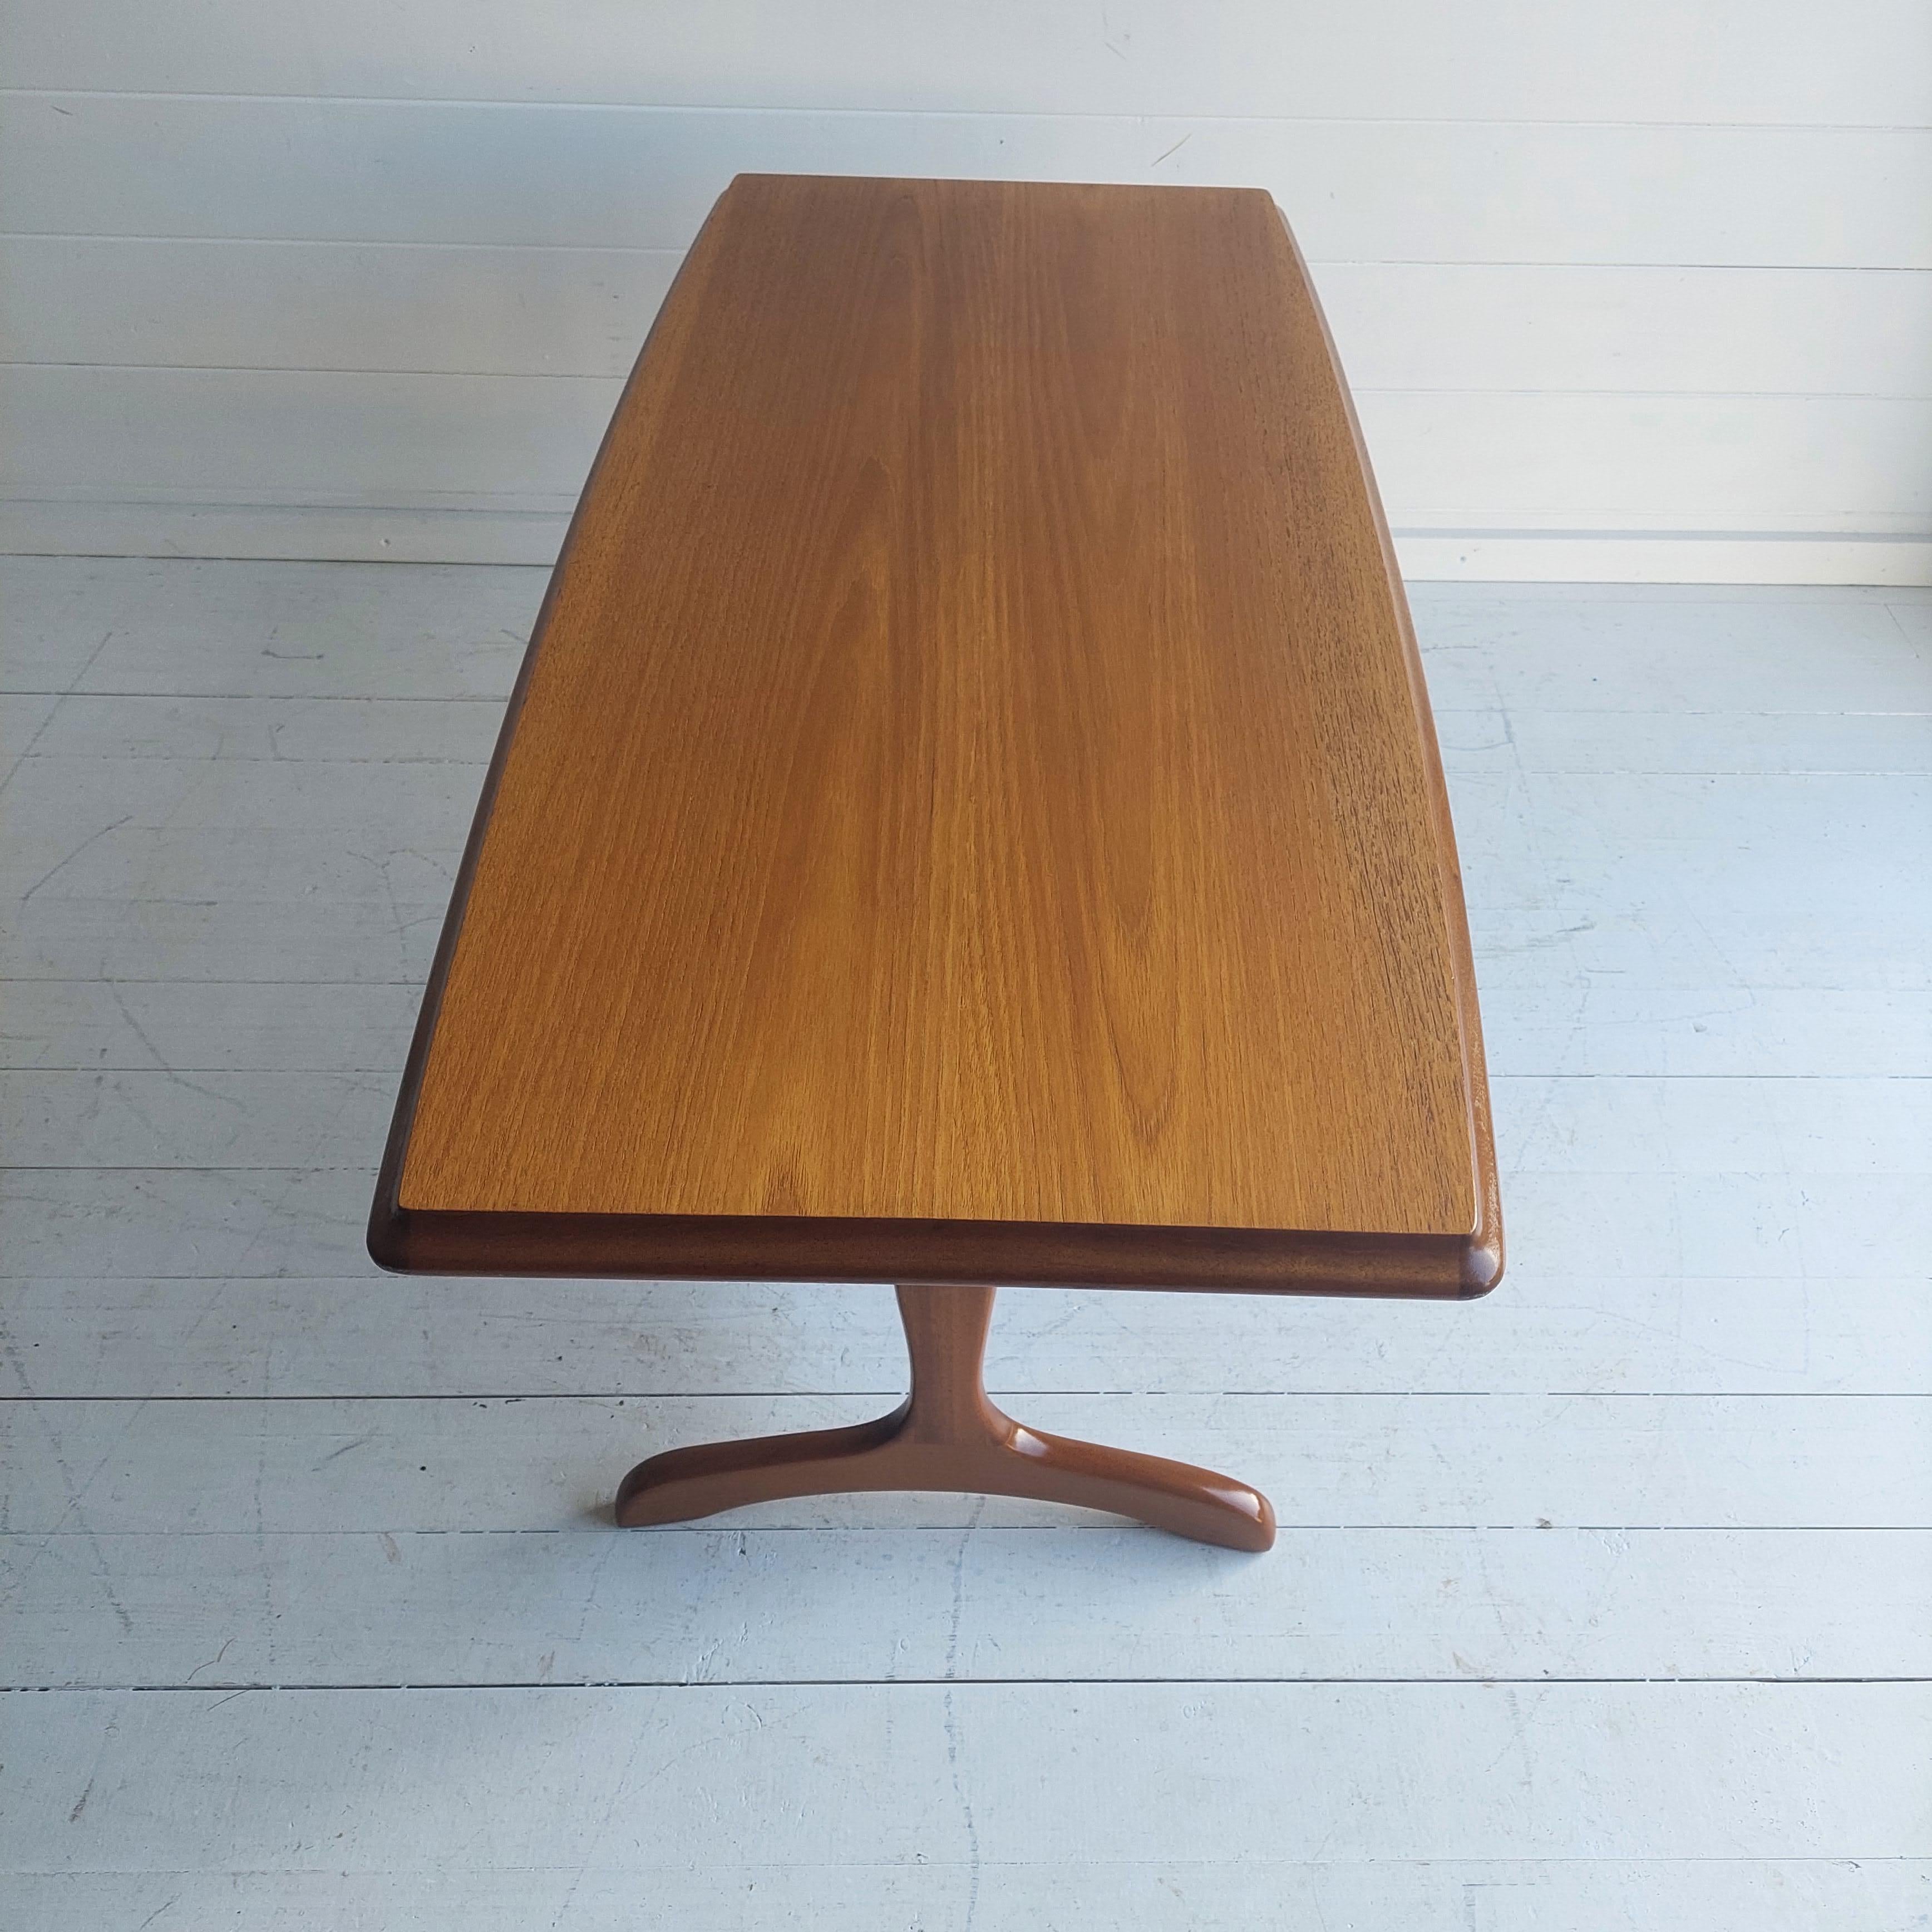 Late Mid Century Teak Coffee Table by Stucliffe Gplan Style, 80s In Good Condition For Sale In Leamington Spa, GB